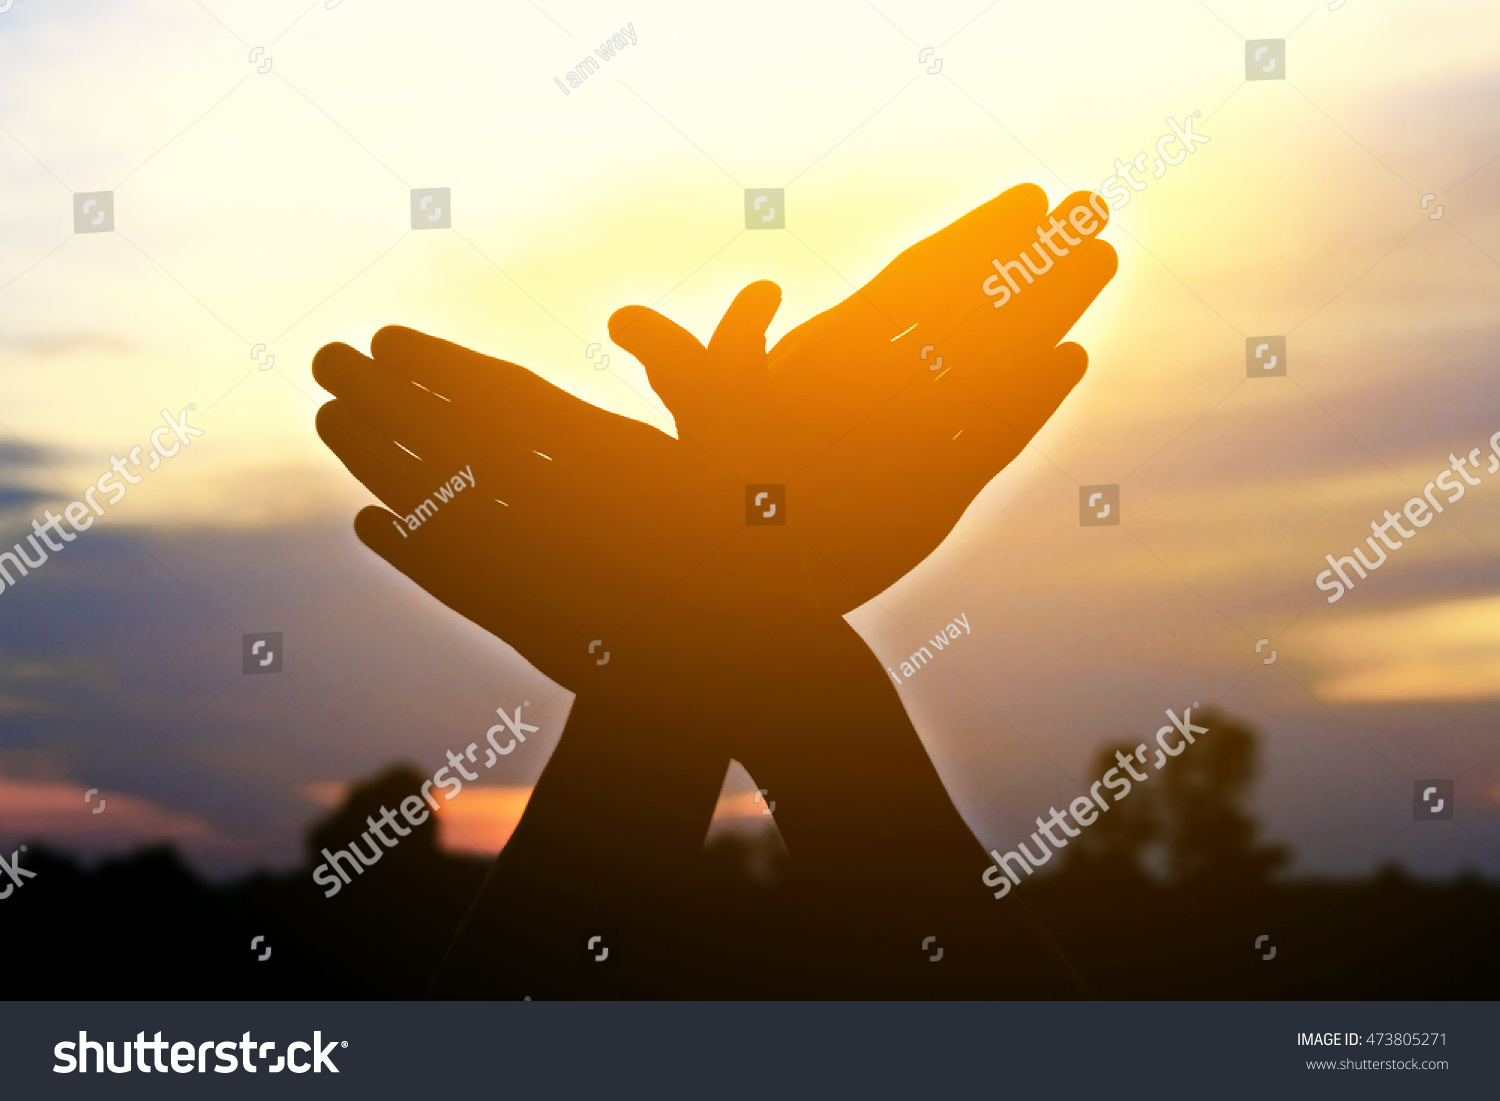 silhouette hand people resemble bird flying in the sunset  #473805271